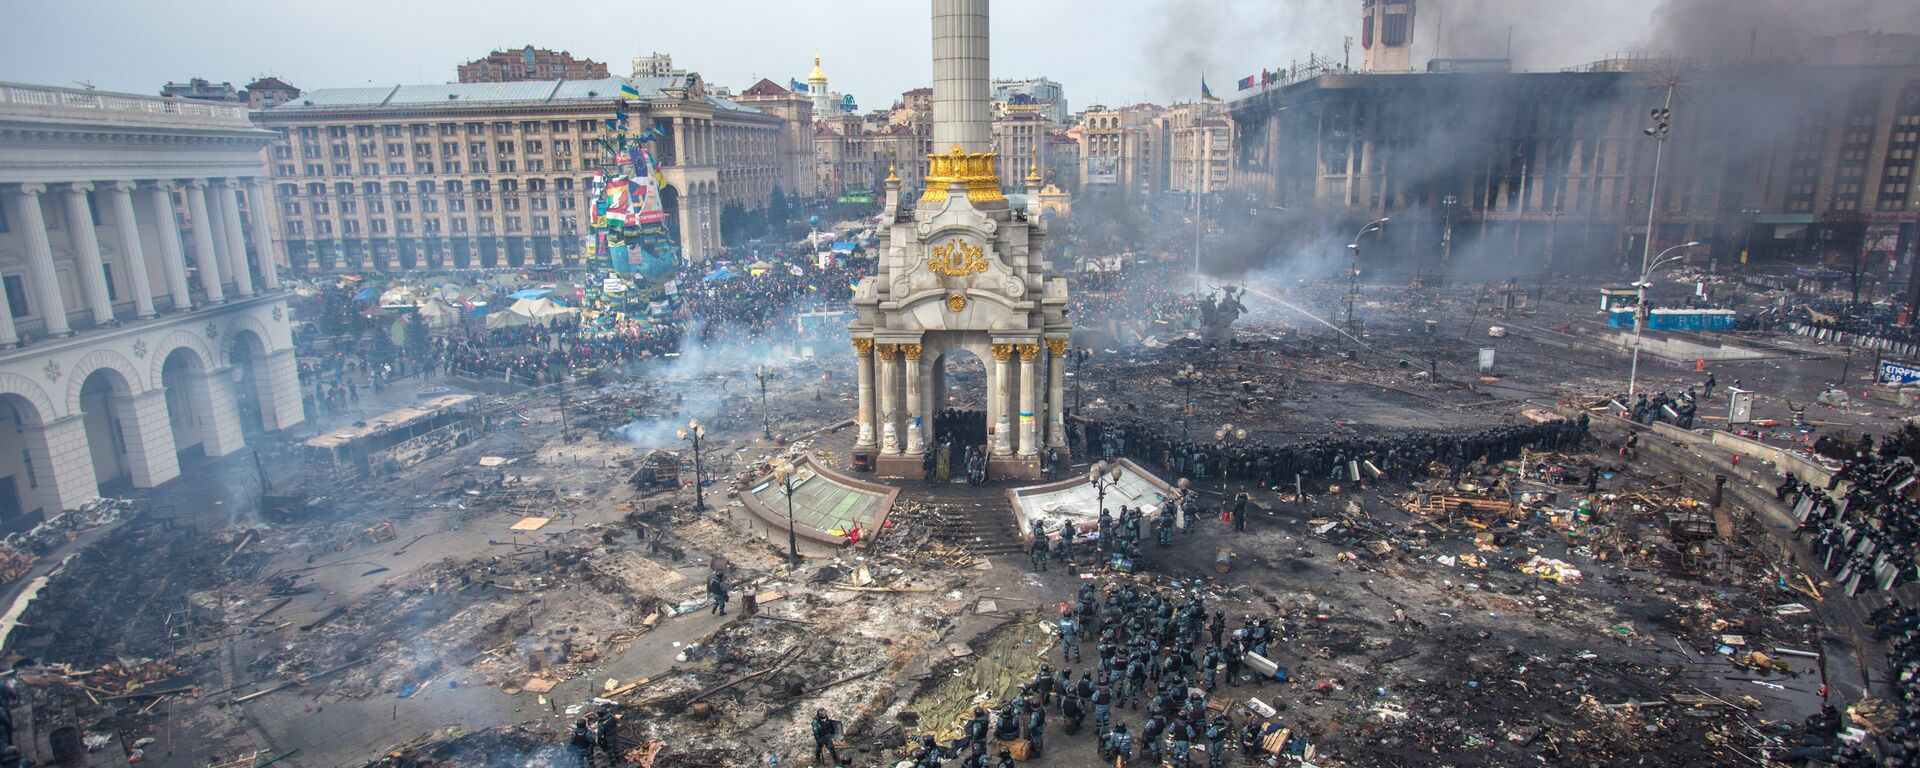 Police officers and opposition supporters are seen on Maidan Nezalezhnosti square in Kiev, where clashes began between protesters and the police. (File) - Sputnik International, 1920, 29.04.2020